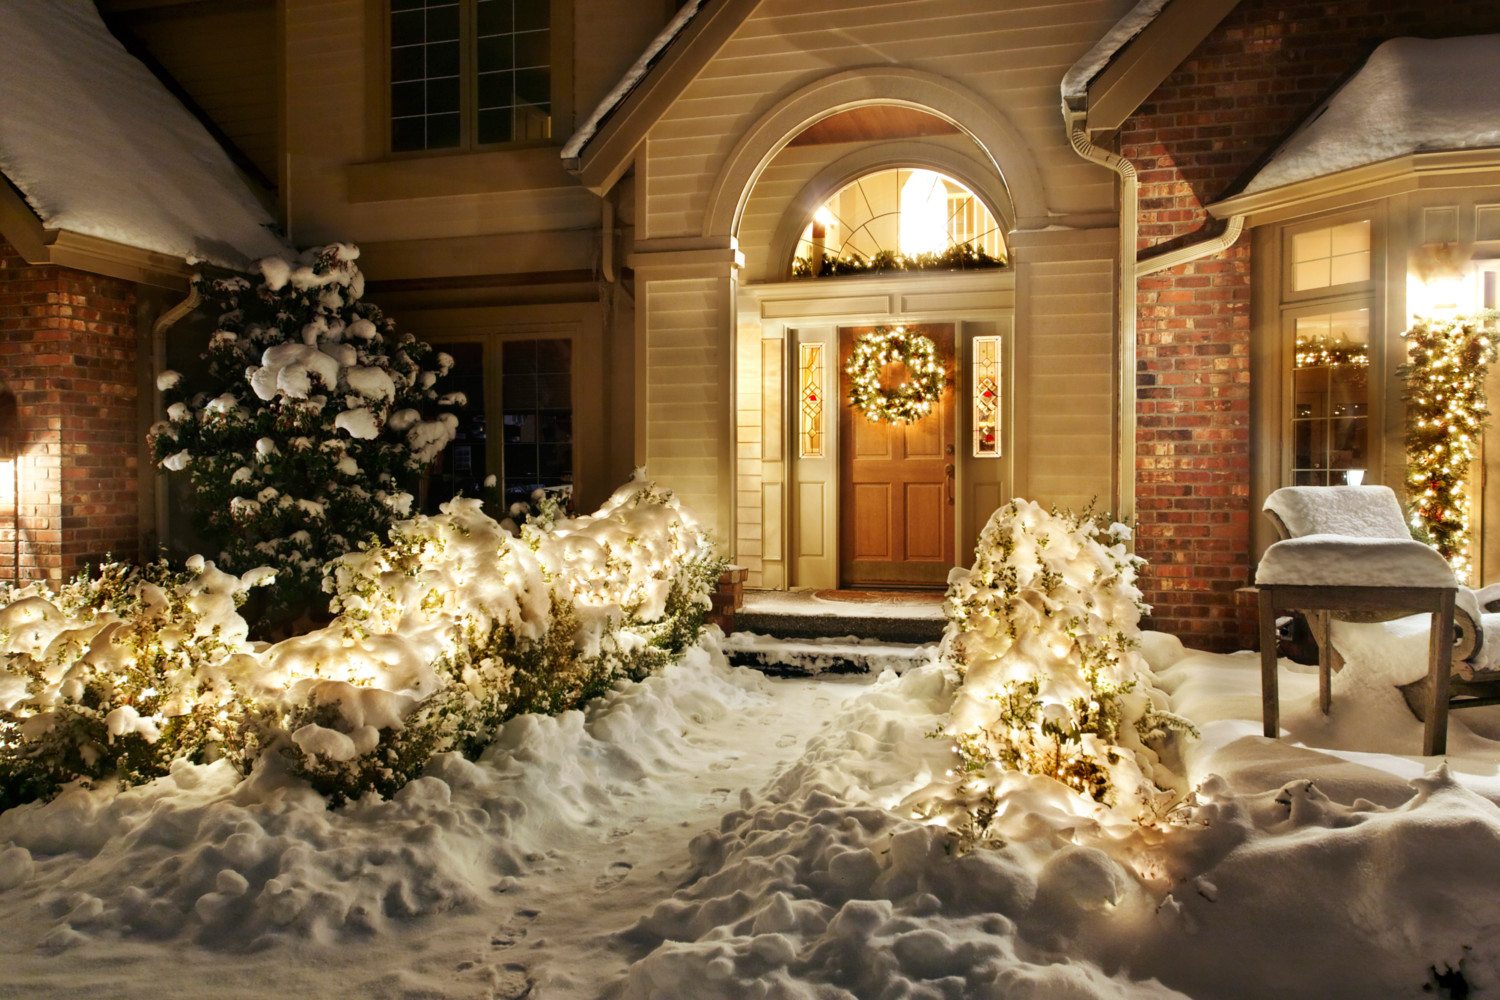 Outside Christmas lights line path to a front door on a snowy evening